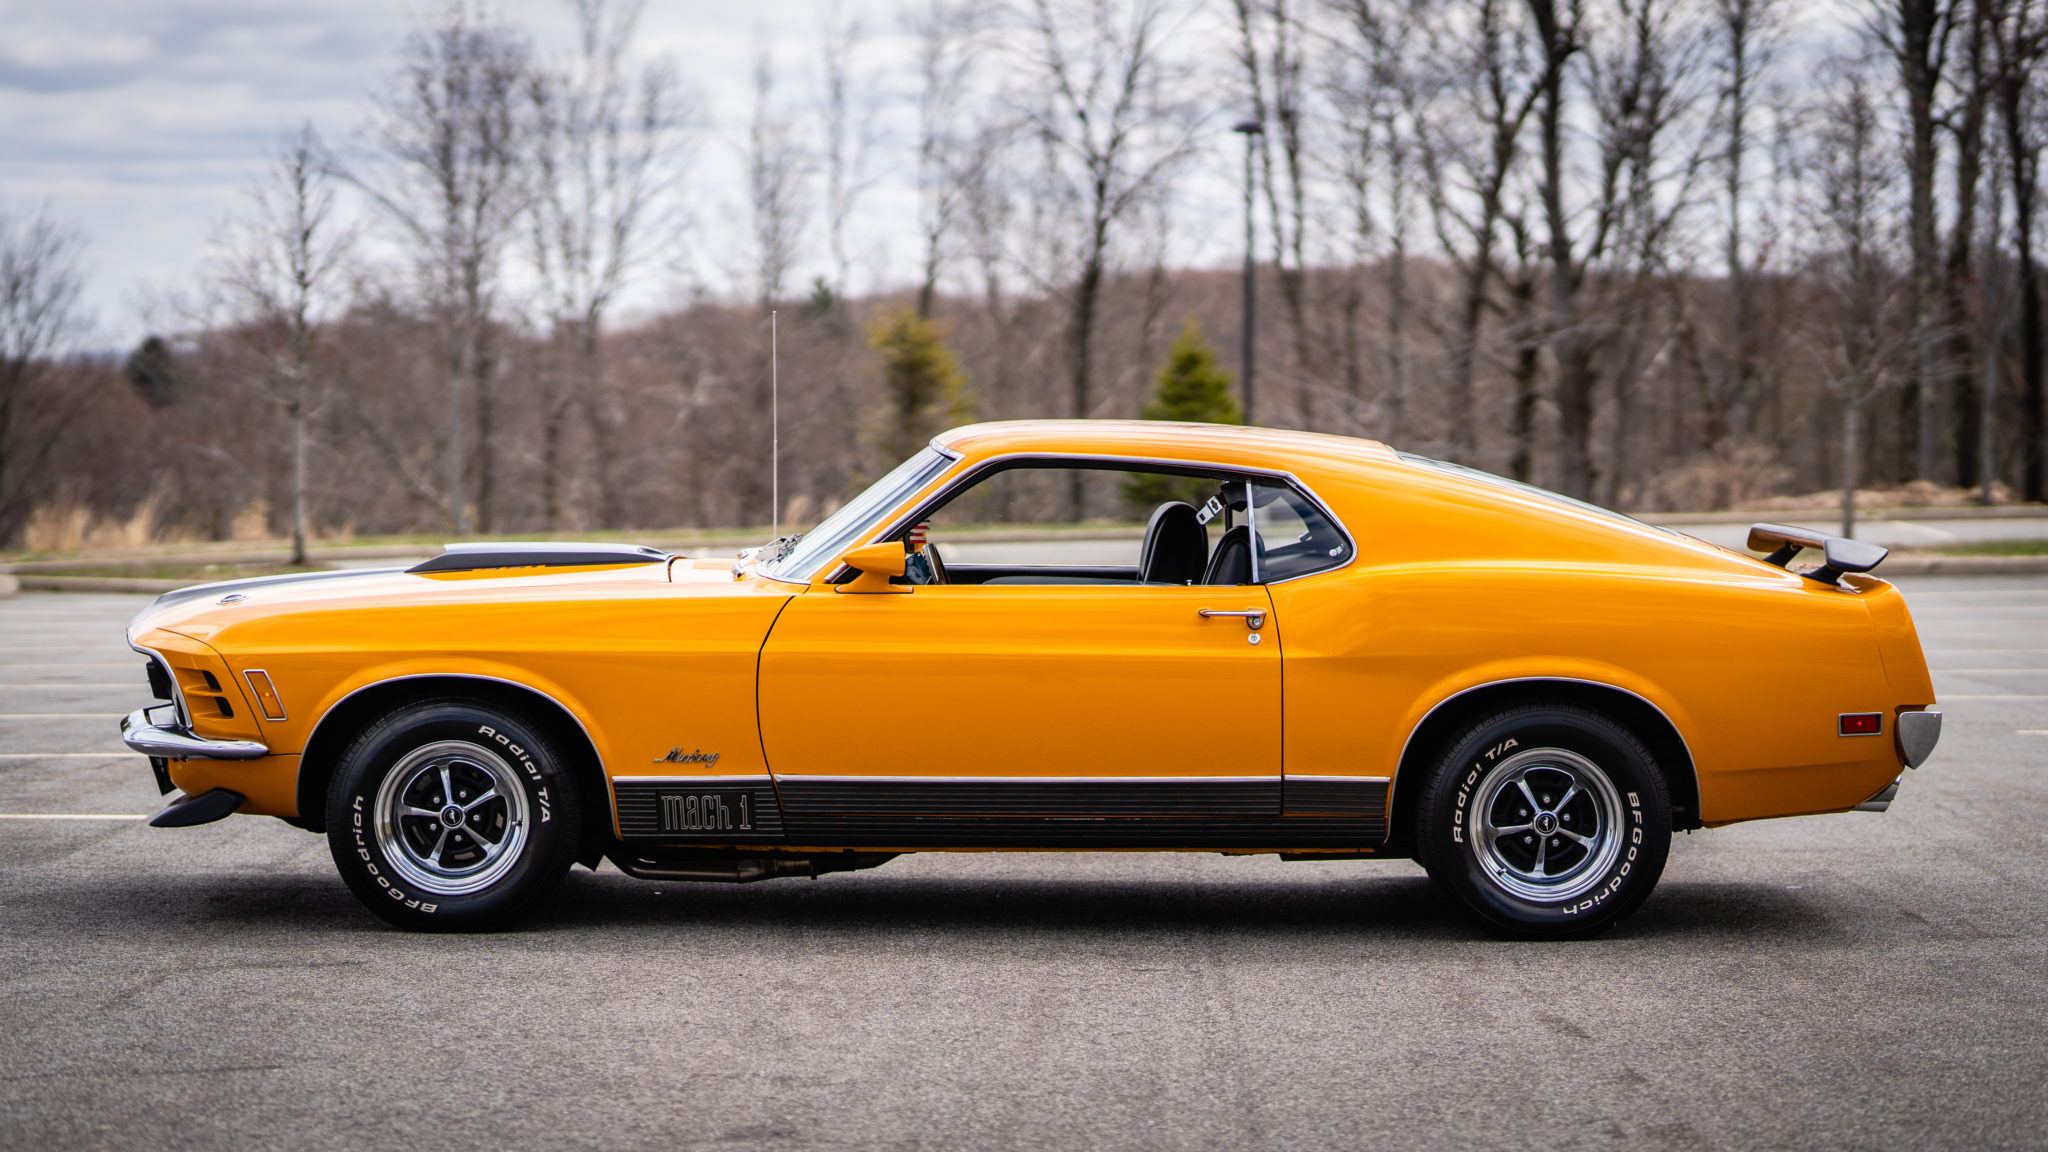 1970 Ford Mustang Mach 1 makes timely auction debut - Autoblog